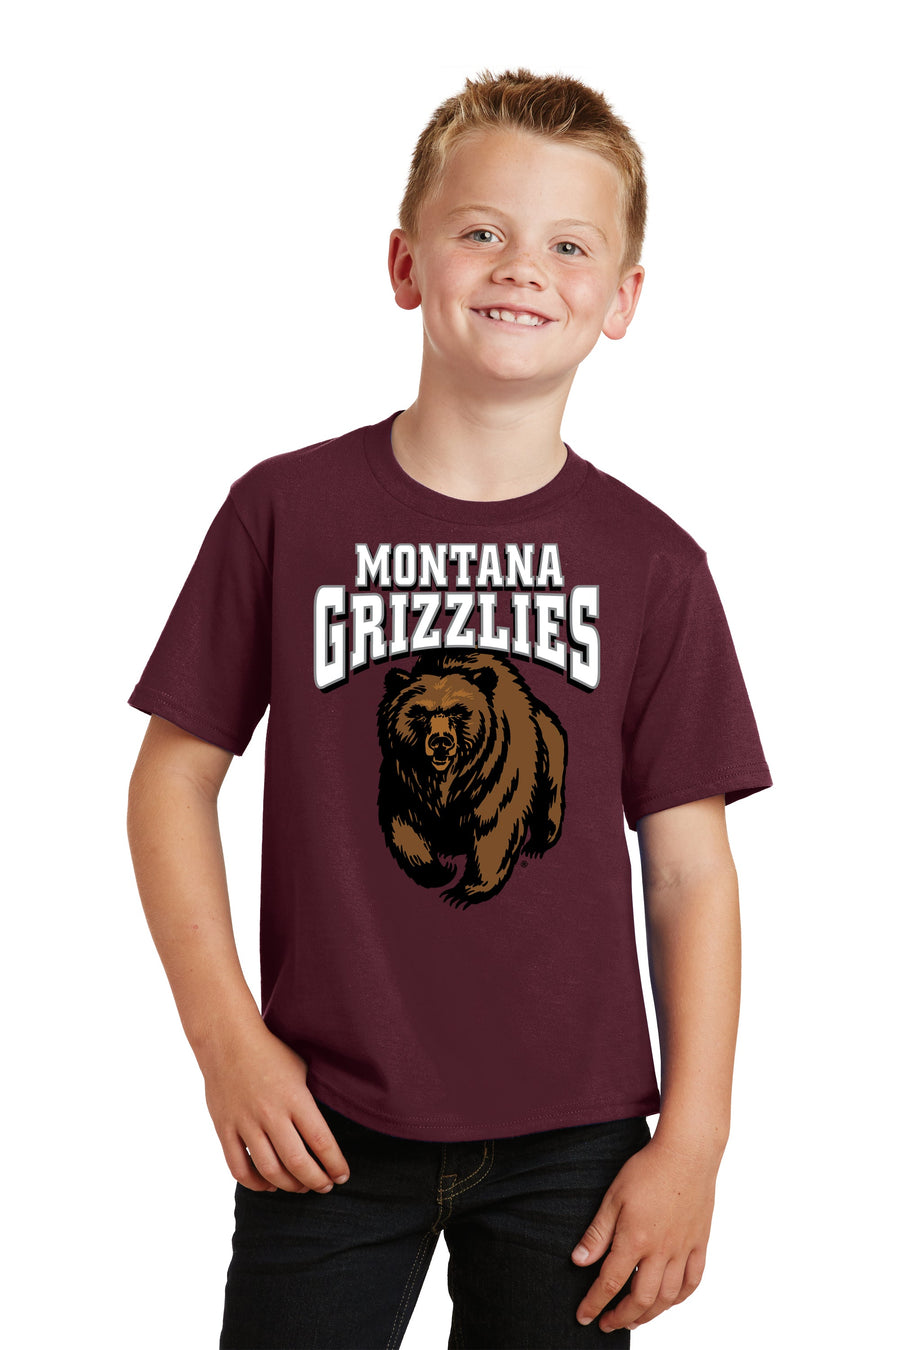 Blue Peaks Creative's maroon Youth Fan Favorite T-shirt with the Montana Grizzlies Charging Bear design